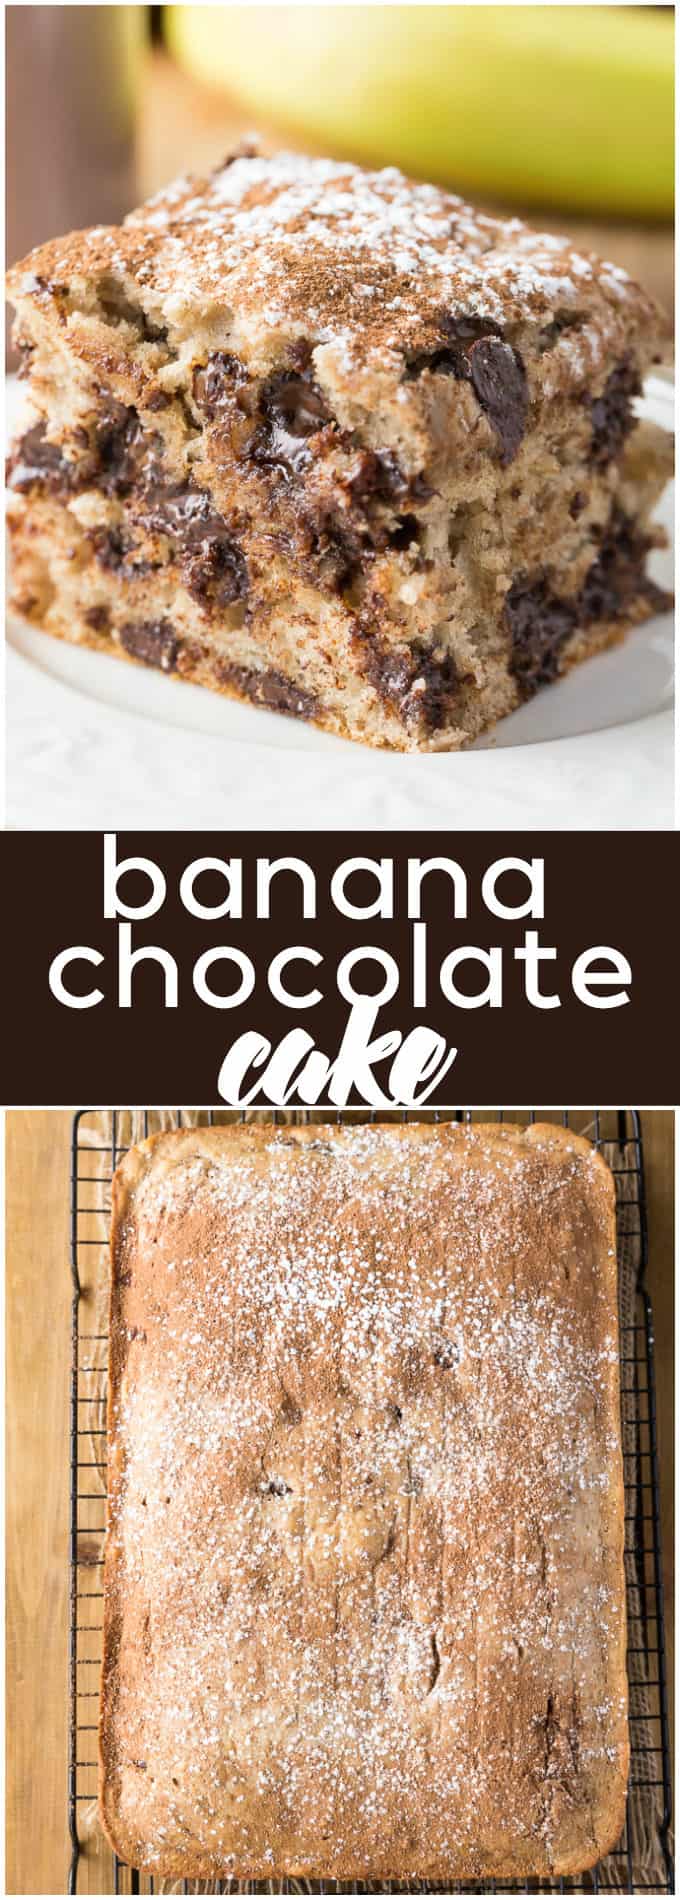 Banana Chocolate Cake - Packed full of sweet flavor! Banana and chocolate are perfect together in this easy cake recipe.